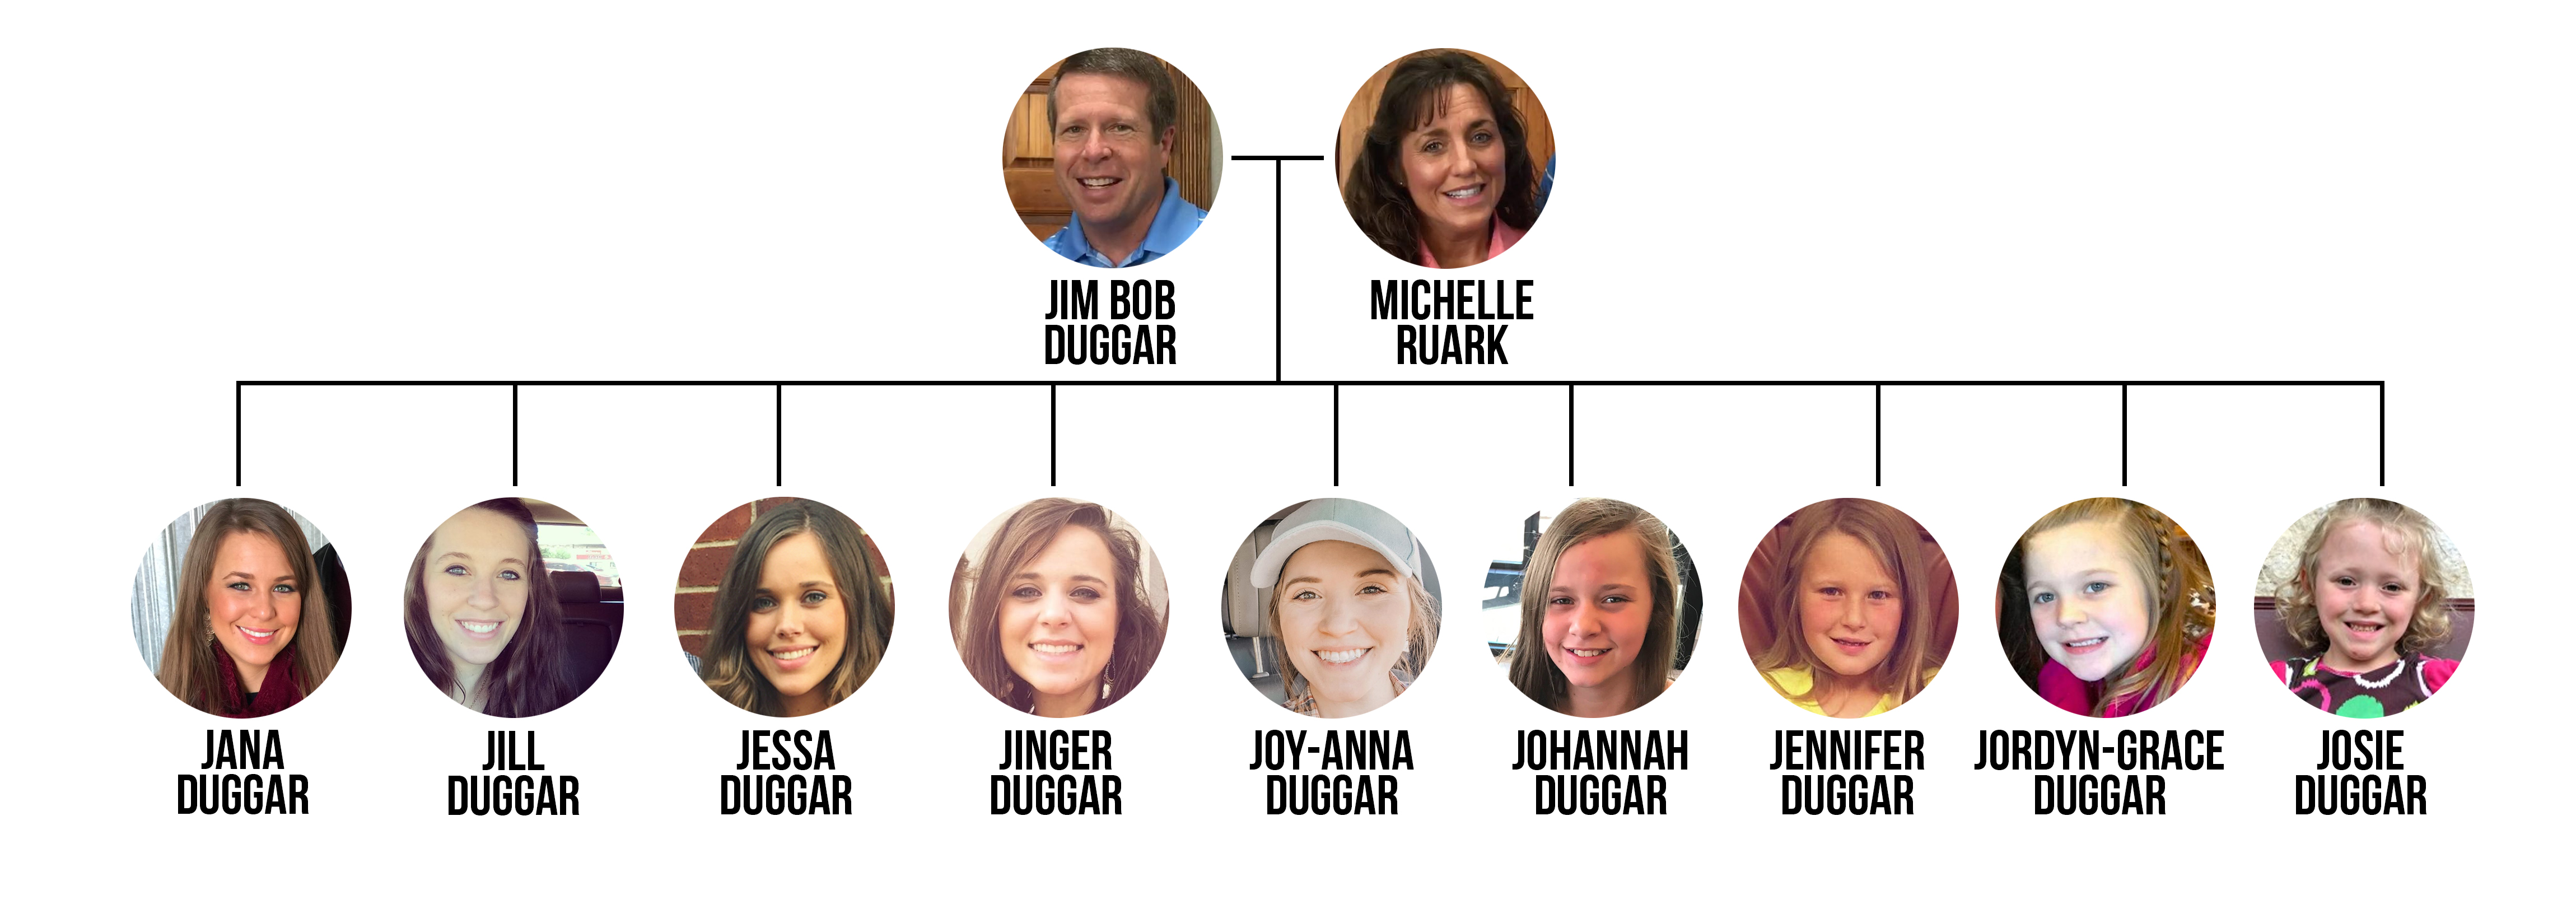 Duggar Family Tree The Ultimate Visual Guide to the Famous Family